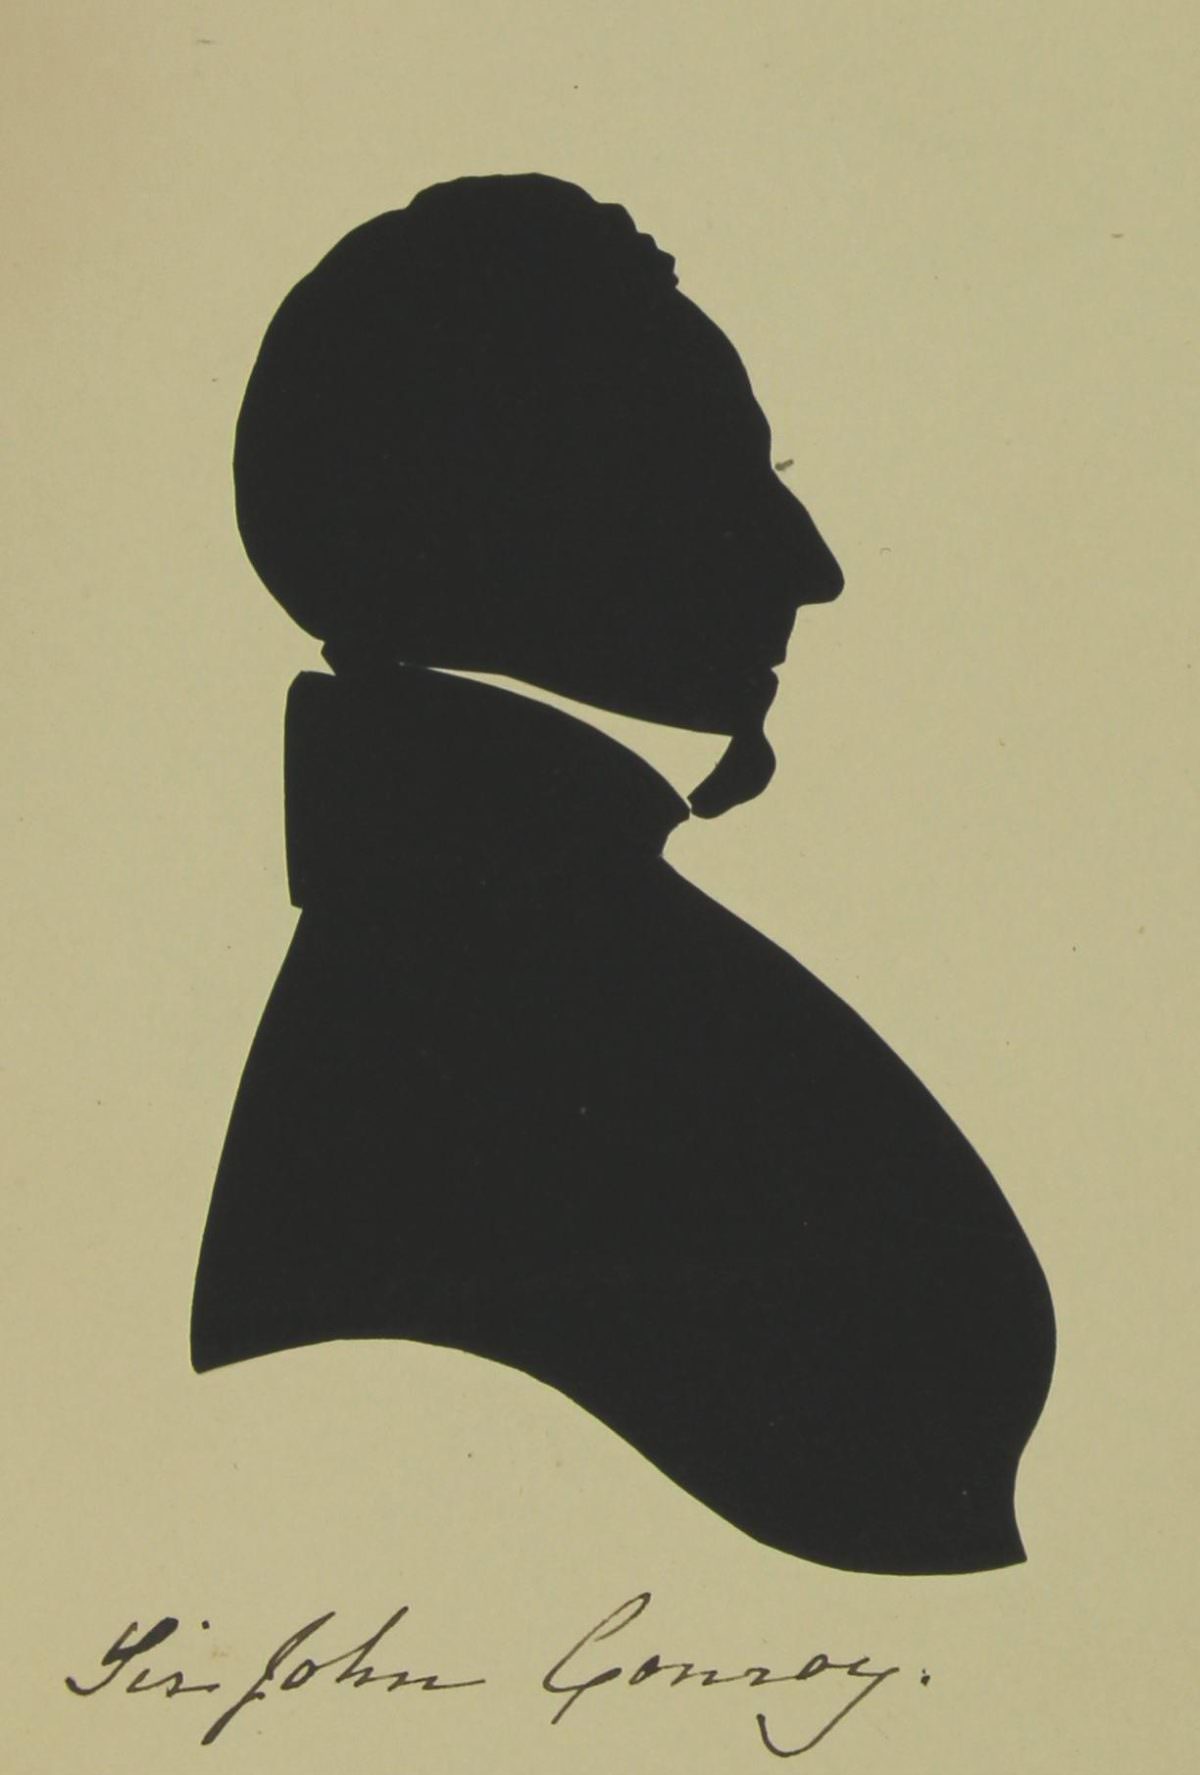 Sir John Conroy”. Cut silhouette, by an unknown artist, from Queen Victoria’s ‘Book of Shades’.